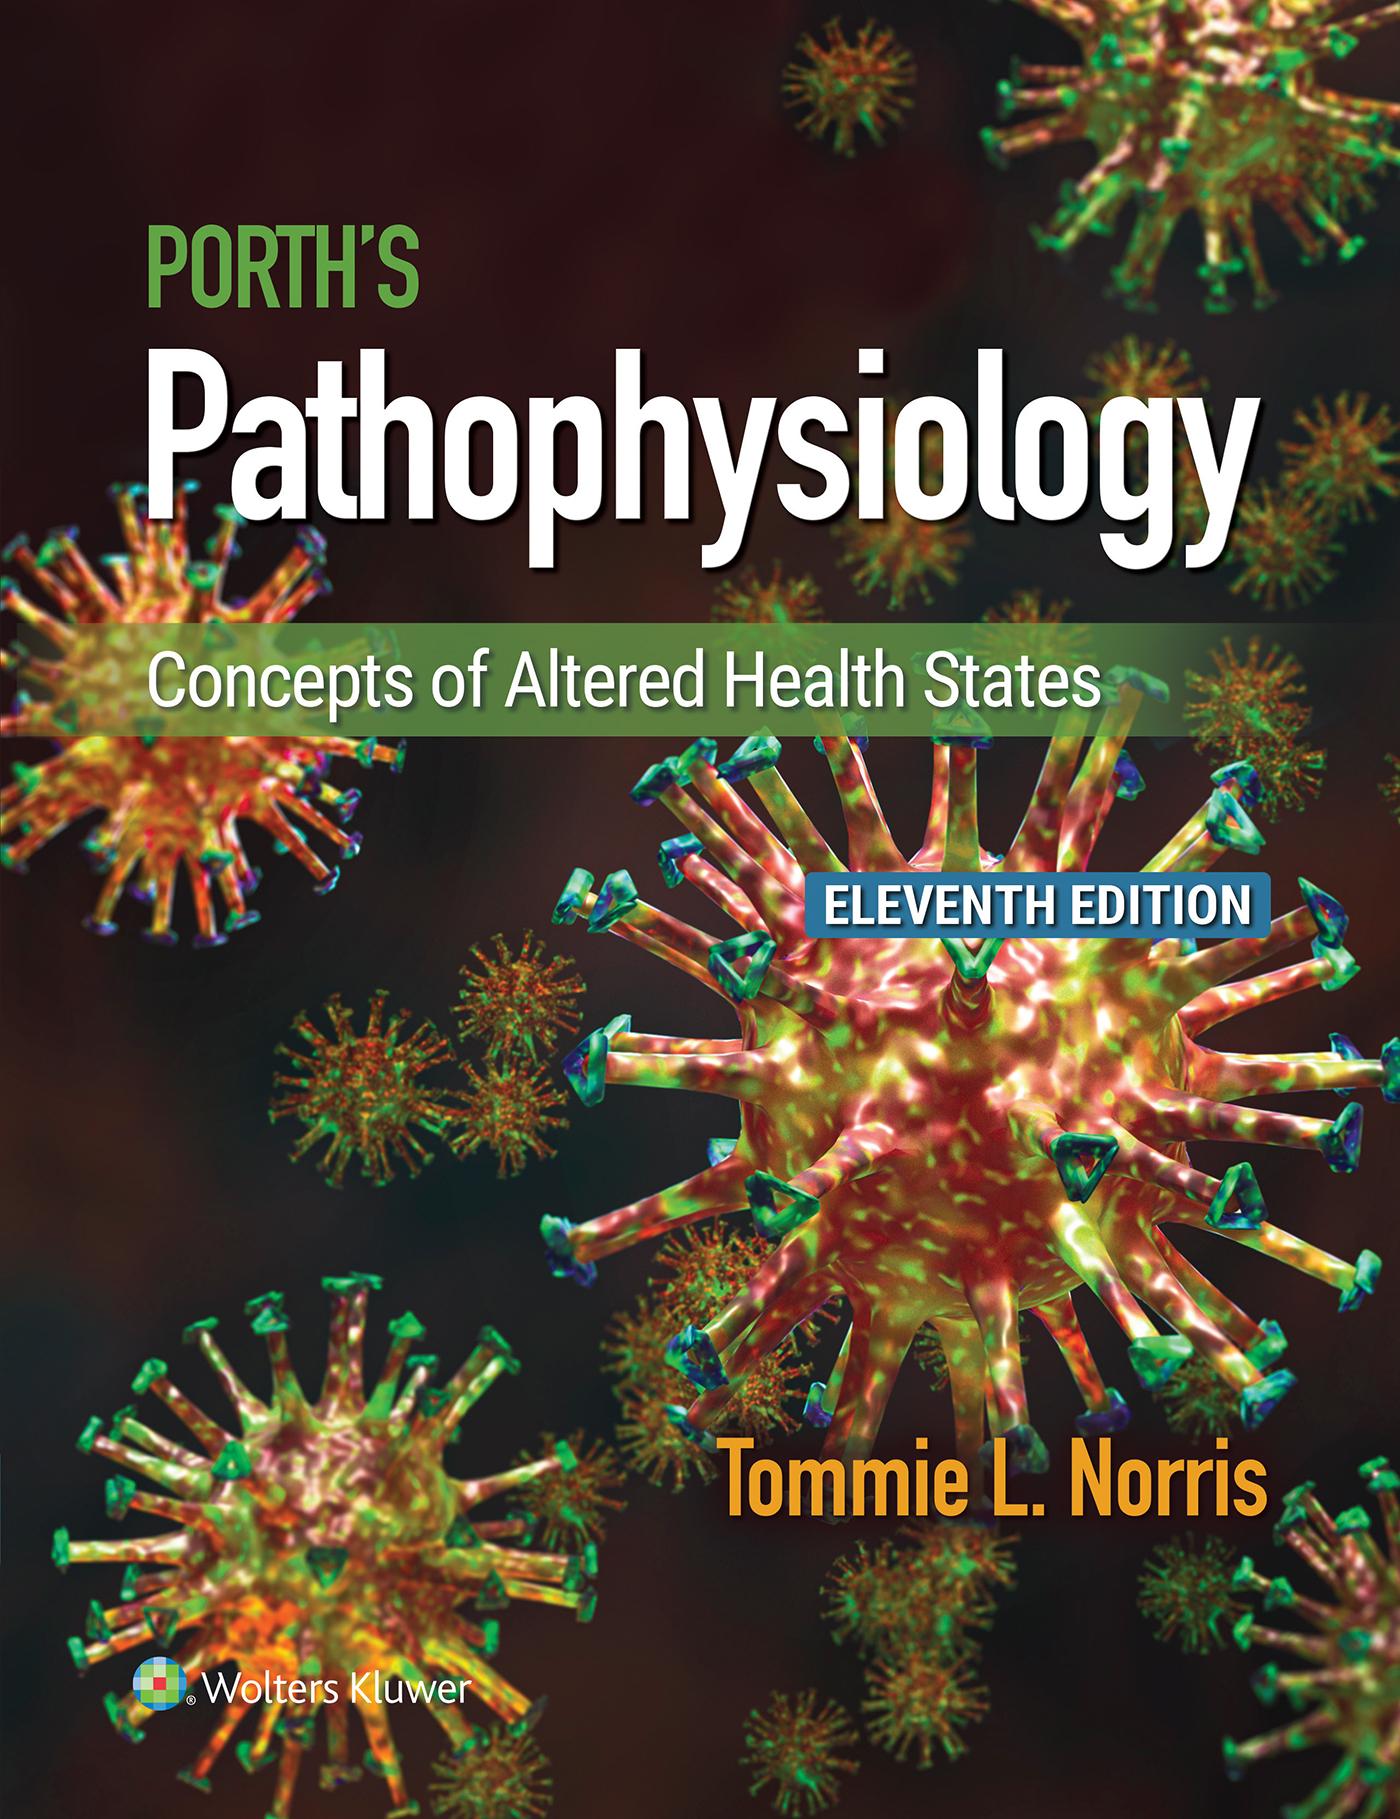 Porth’s Pathophysiology: Concepts of Altered Health States, 11th Edition